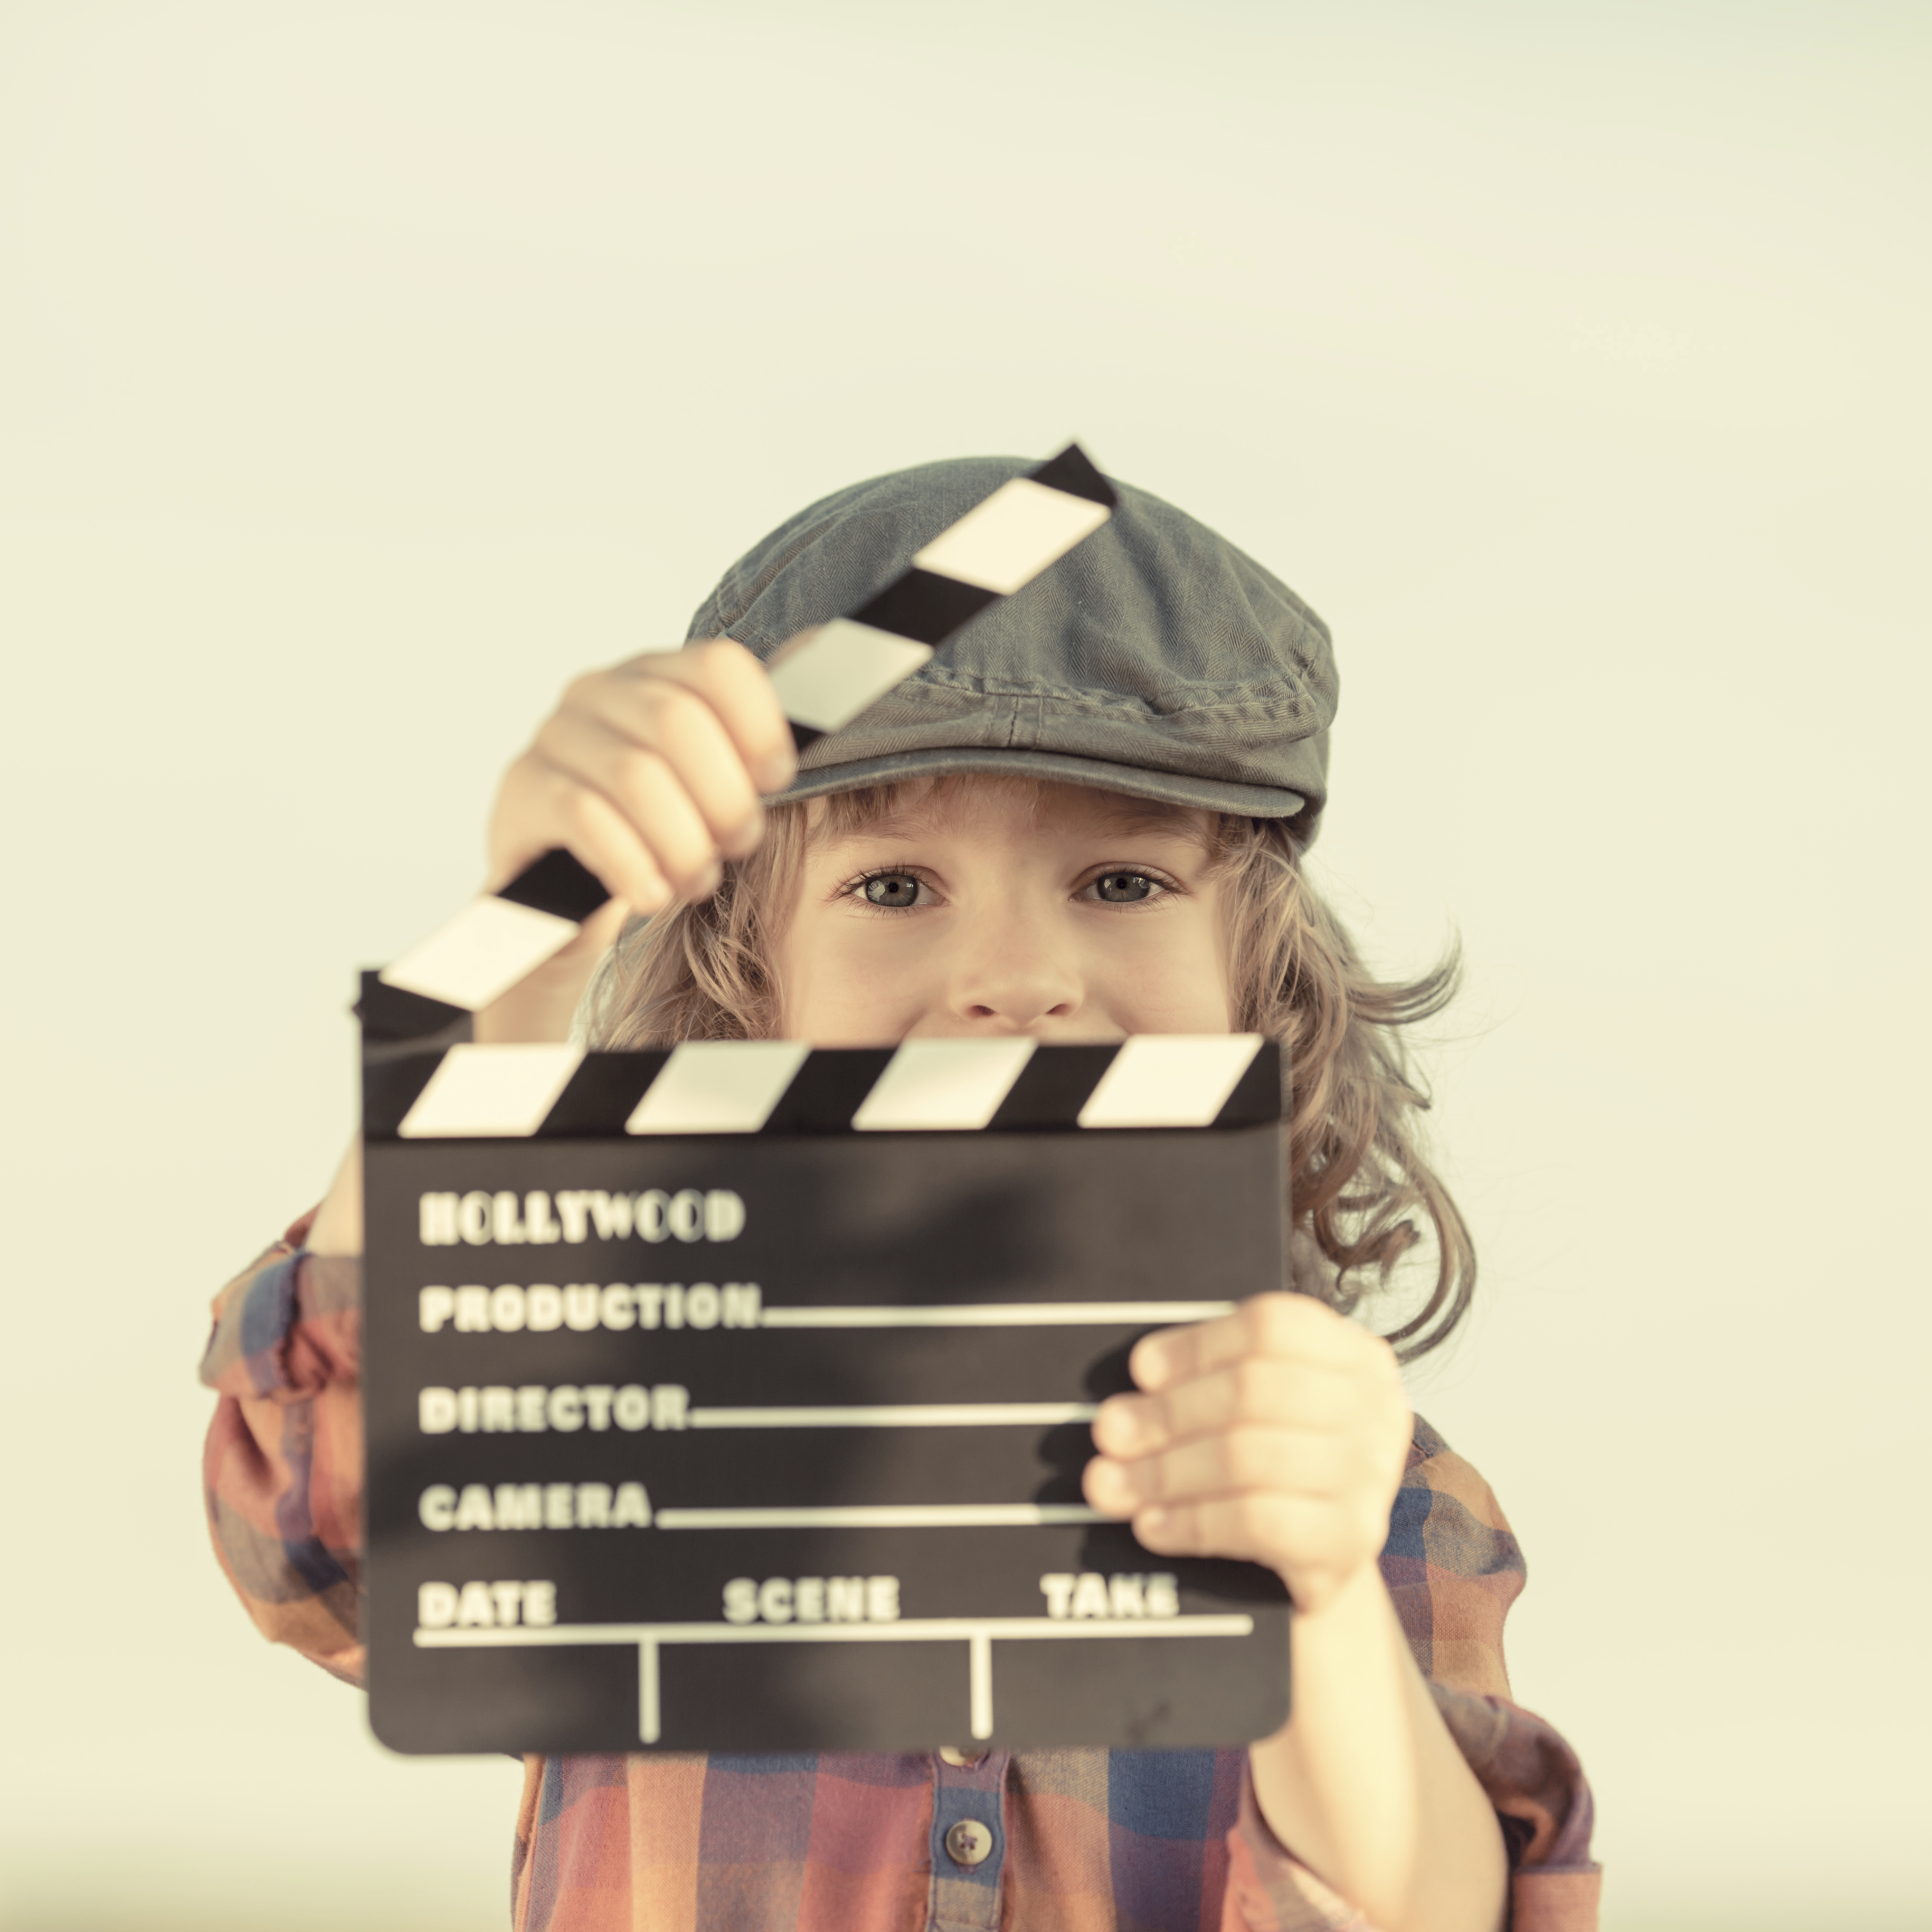 Kid holding clapper board in hands